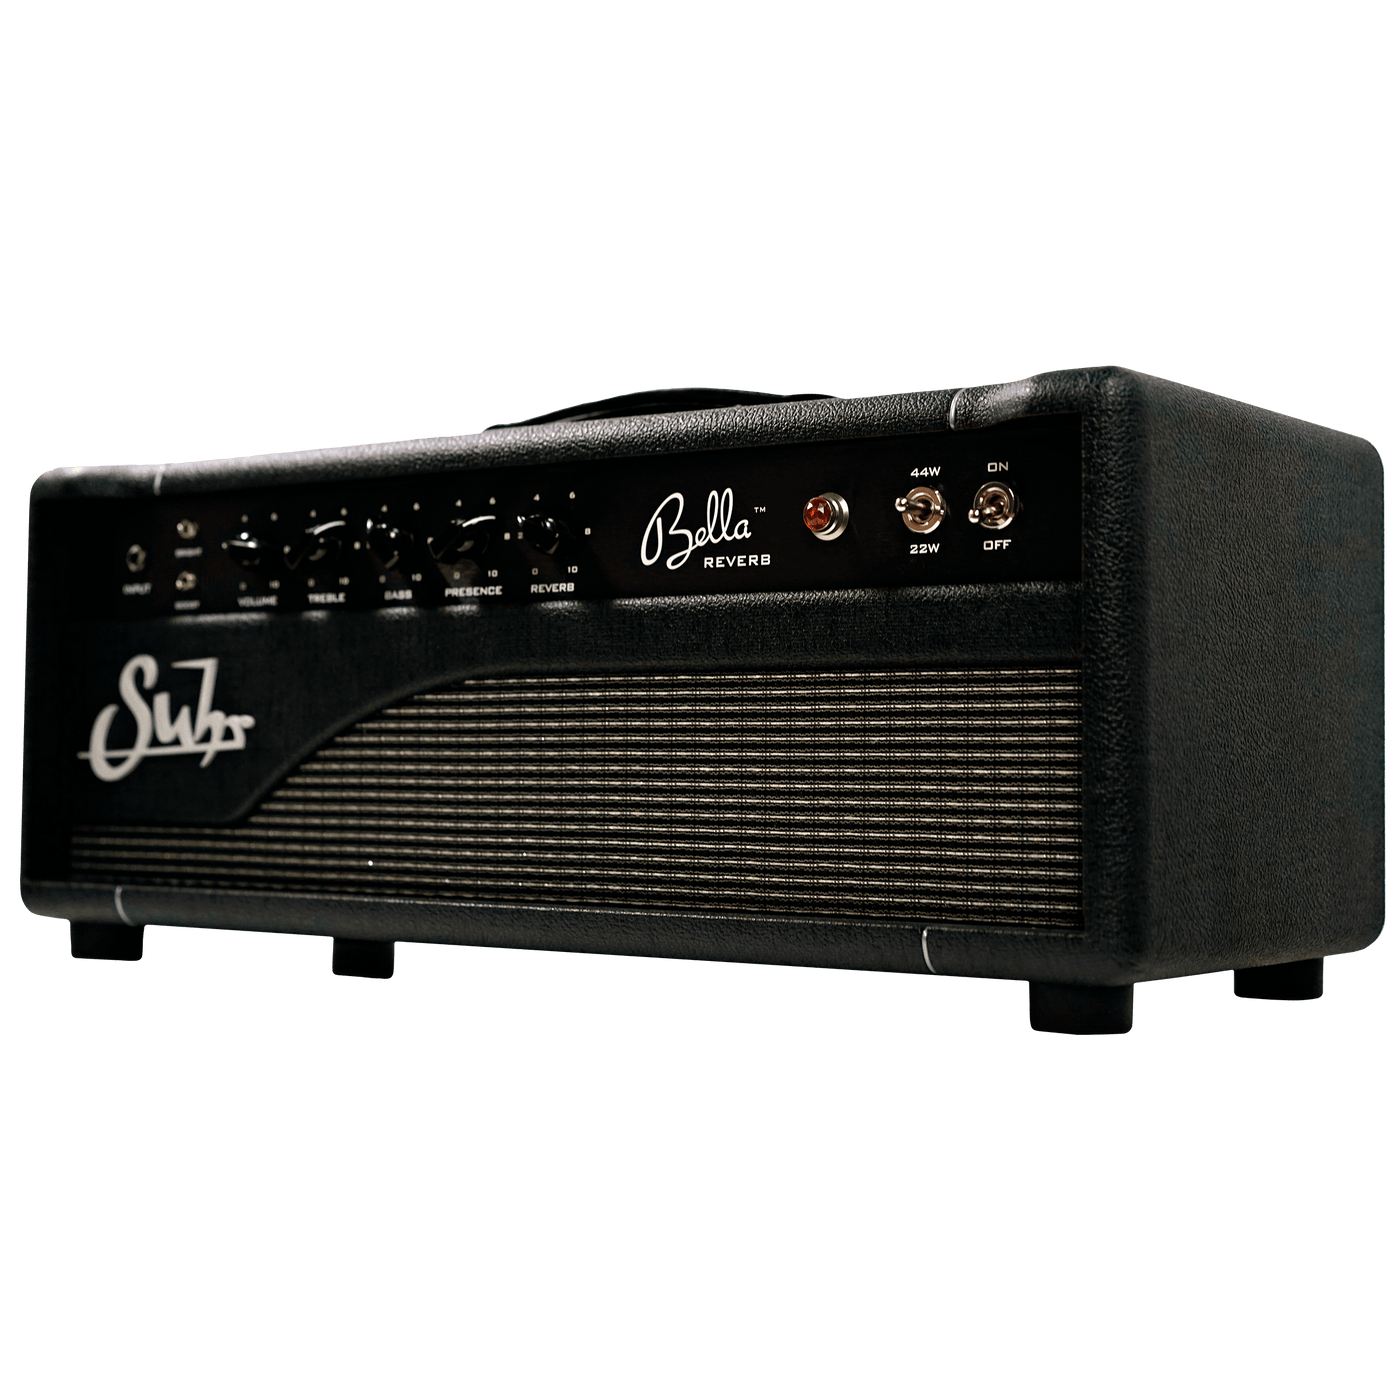 Suhr Bella Reverb Head - $2899990 - Gearhub - A modern interpretation of classic brownface sounds while retaining the vintage heritage Output • Switchable 44/22 Watts RMS Power Tubes • 2x 6L6GC Preamp Tubes • 3x 12AX7, 1x 12AT7 Dimensiones • 610mm x 251mm x 264 mm Peso • 15.9 kg